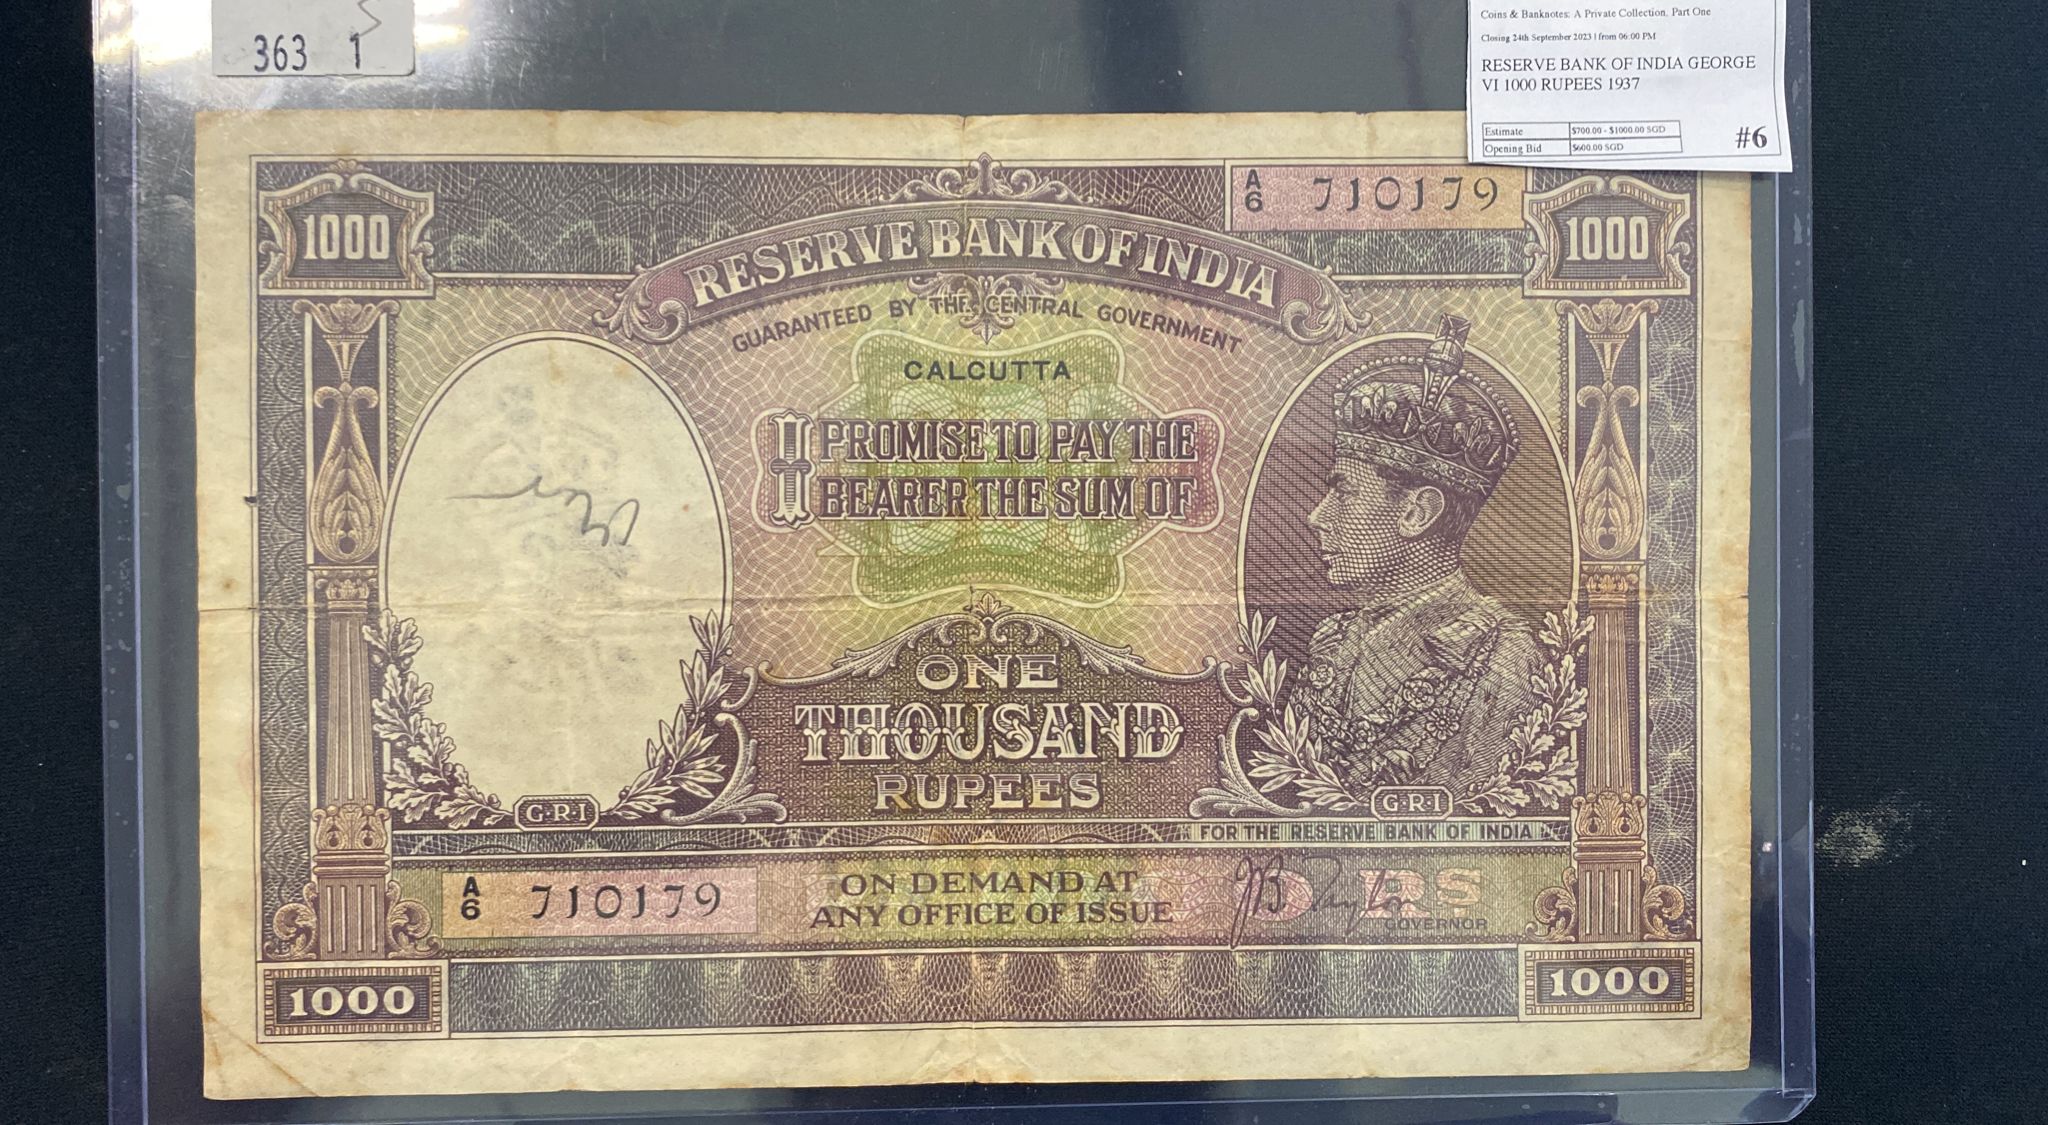 RESERVE BANK OF INDIA GEORGE VI 1000 RUPEES 1937 - Image 3 of 4